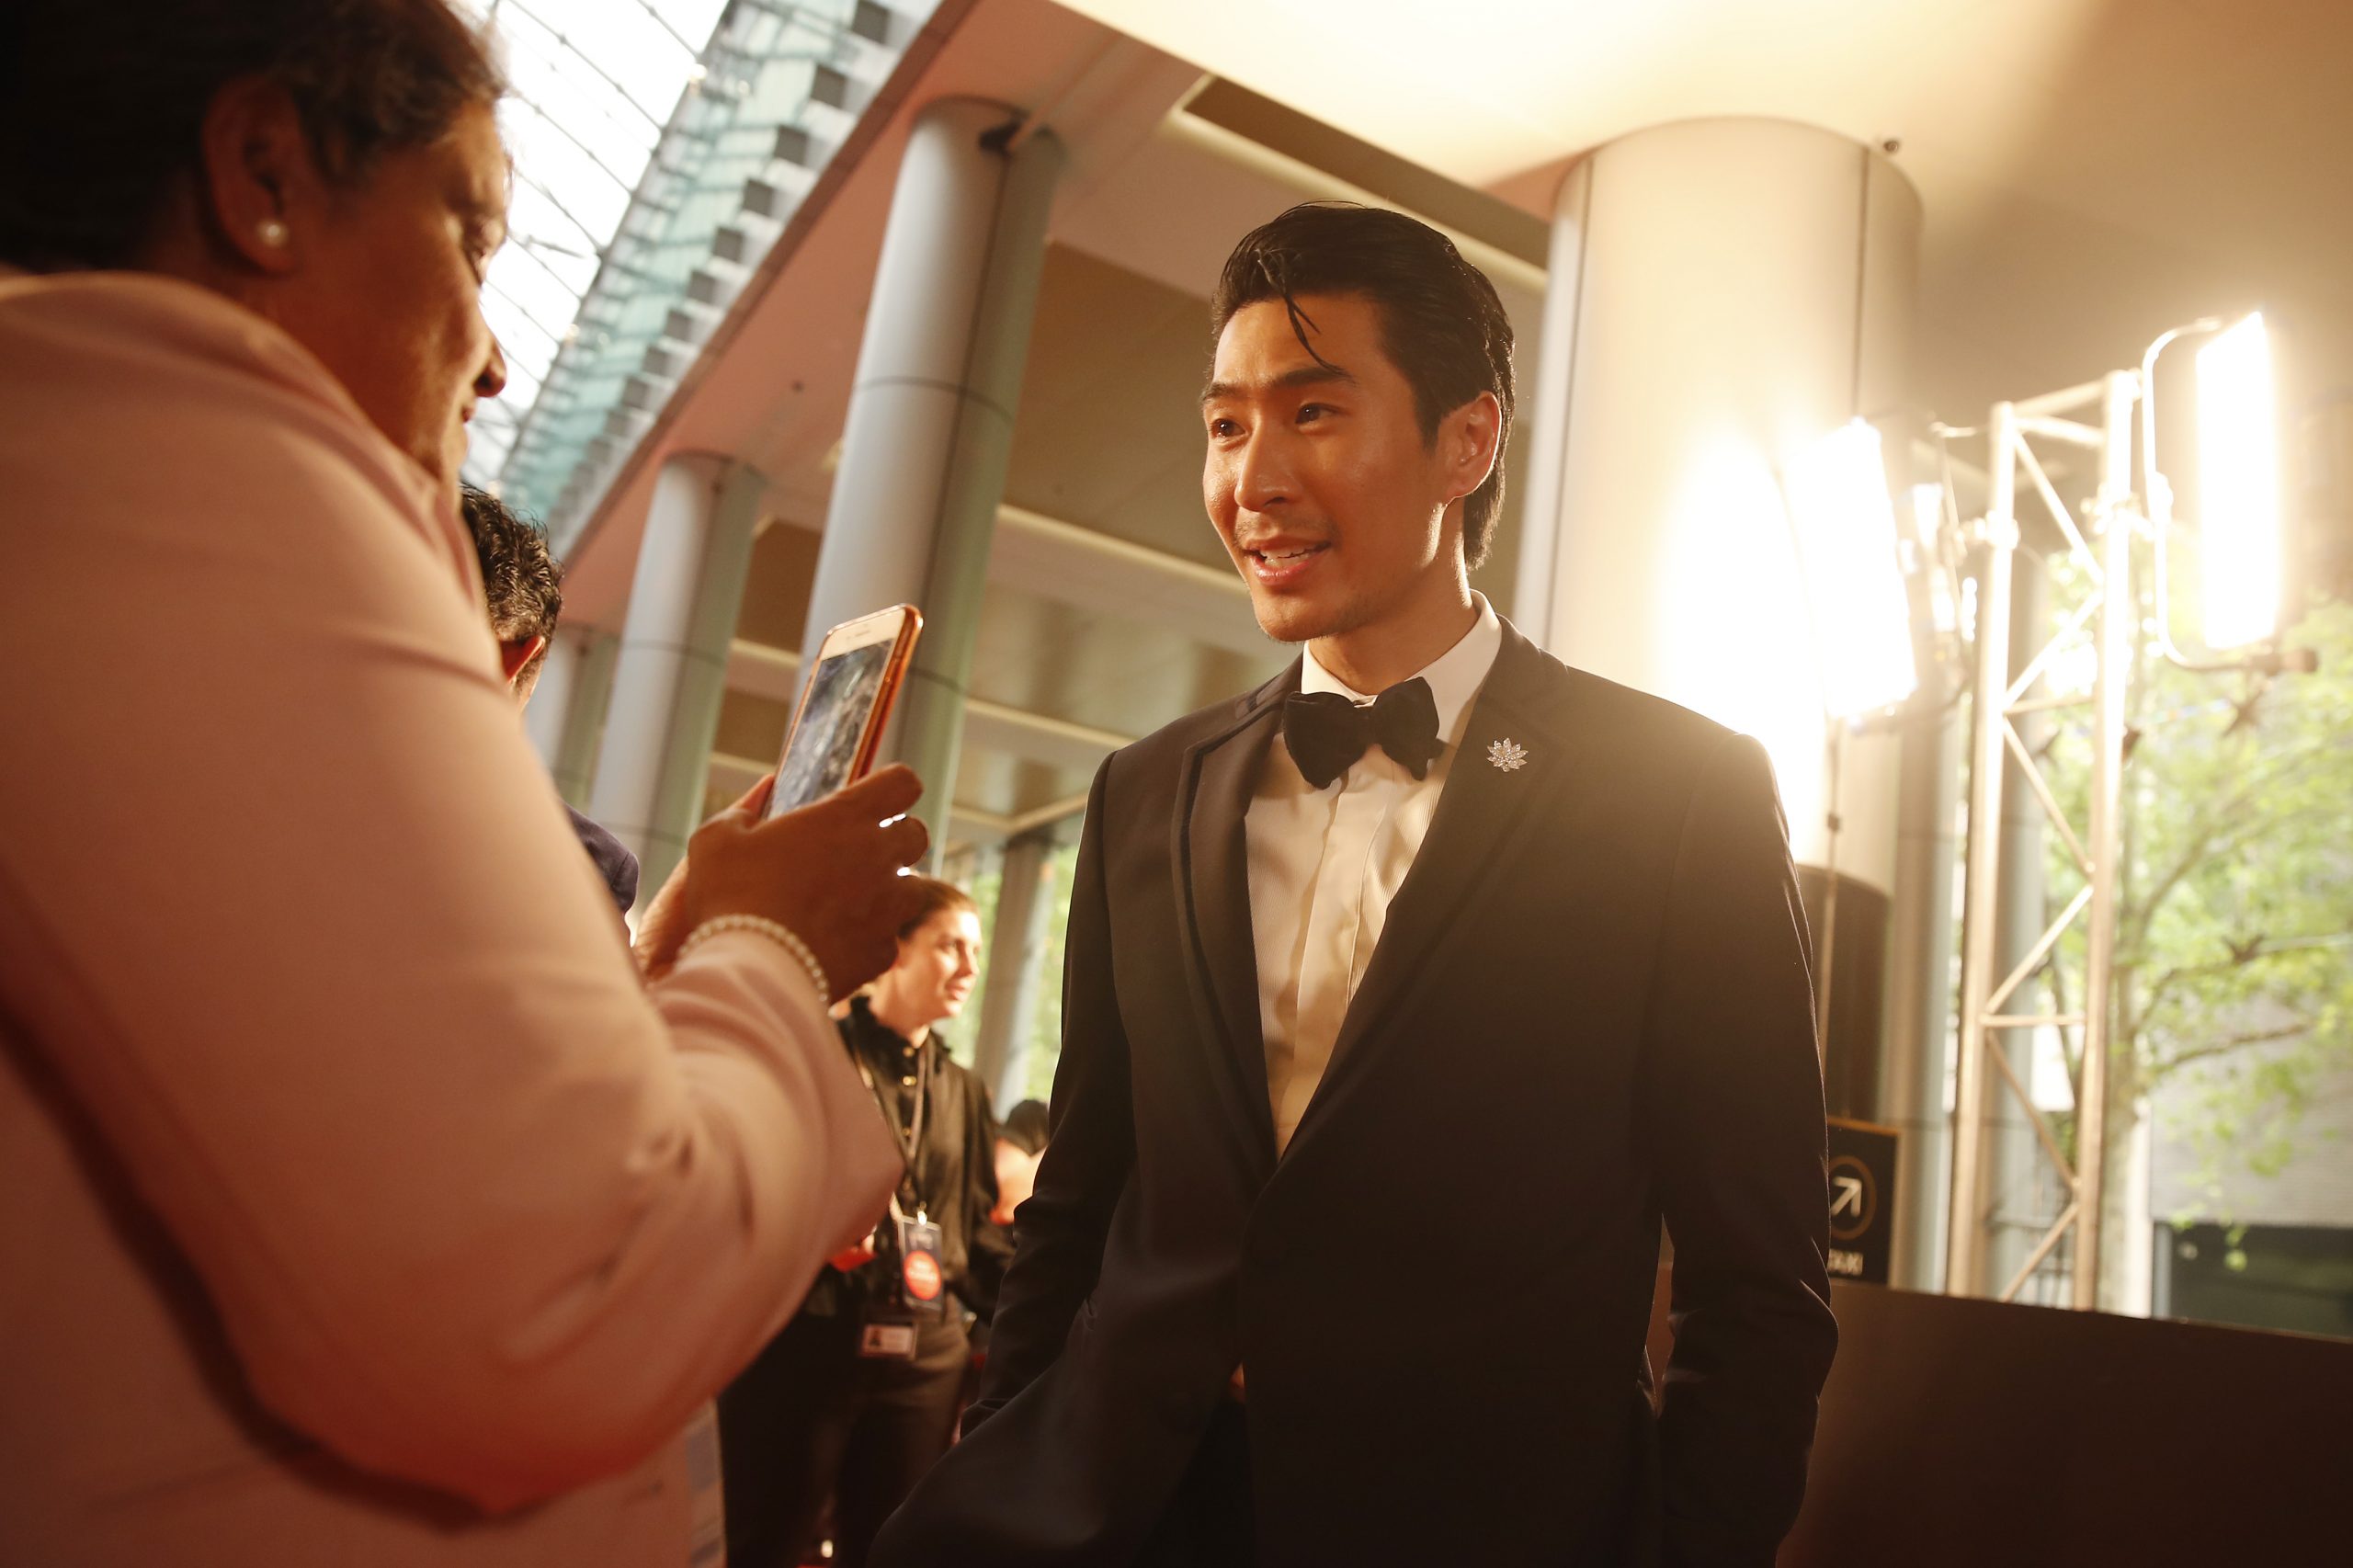 Simu Liu, Henry Golding and what it means to be Asian in Hollywood